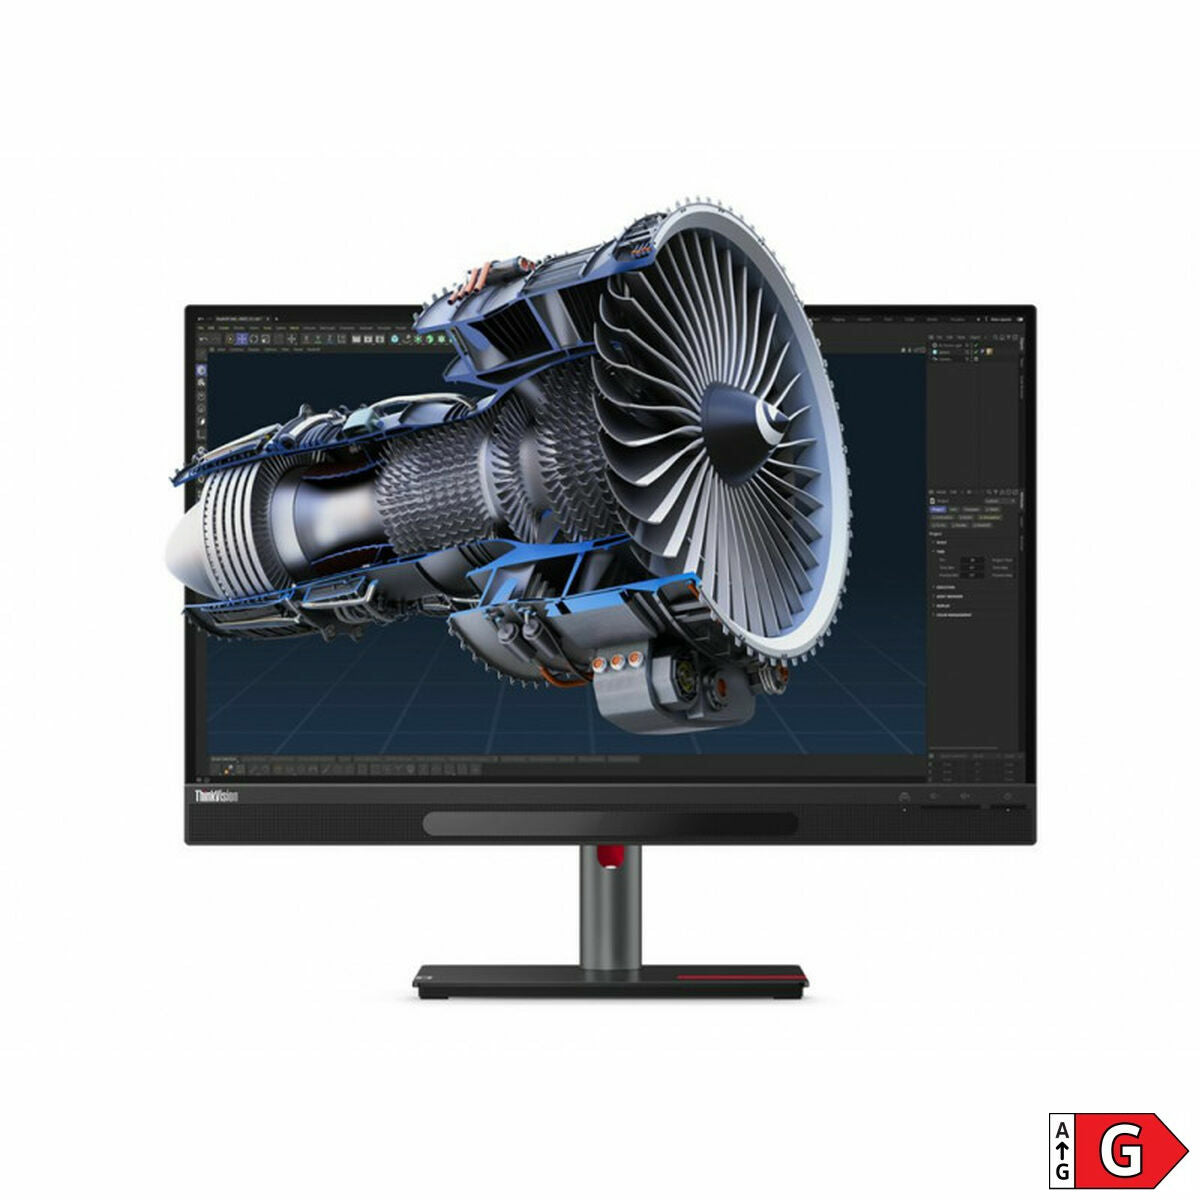 Gaming Monitor Lenovo ThinkVision 27 3D 27", Lenovo, Computing, gaming-monitor-lenovo-thinkvision-27-3d-27, Brand_Lenovo, category-reference-2609, category-reference-2642, category-reference-2644, category-reference-t-19685, category-reference-t-19902, computers / peripherals, Condition_NEW, office, Price_+ 1000, Teleworking, RiotNook